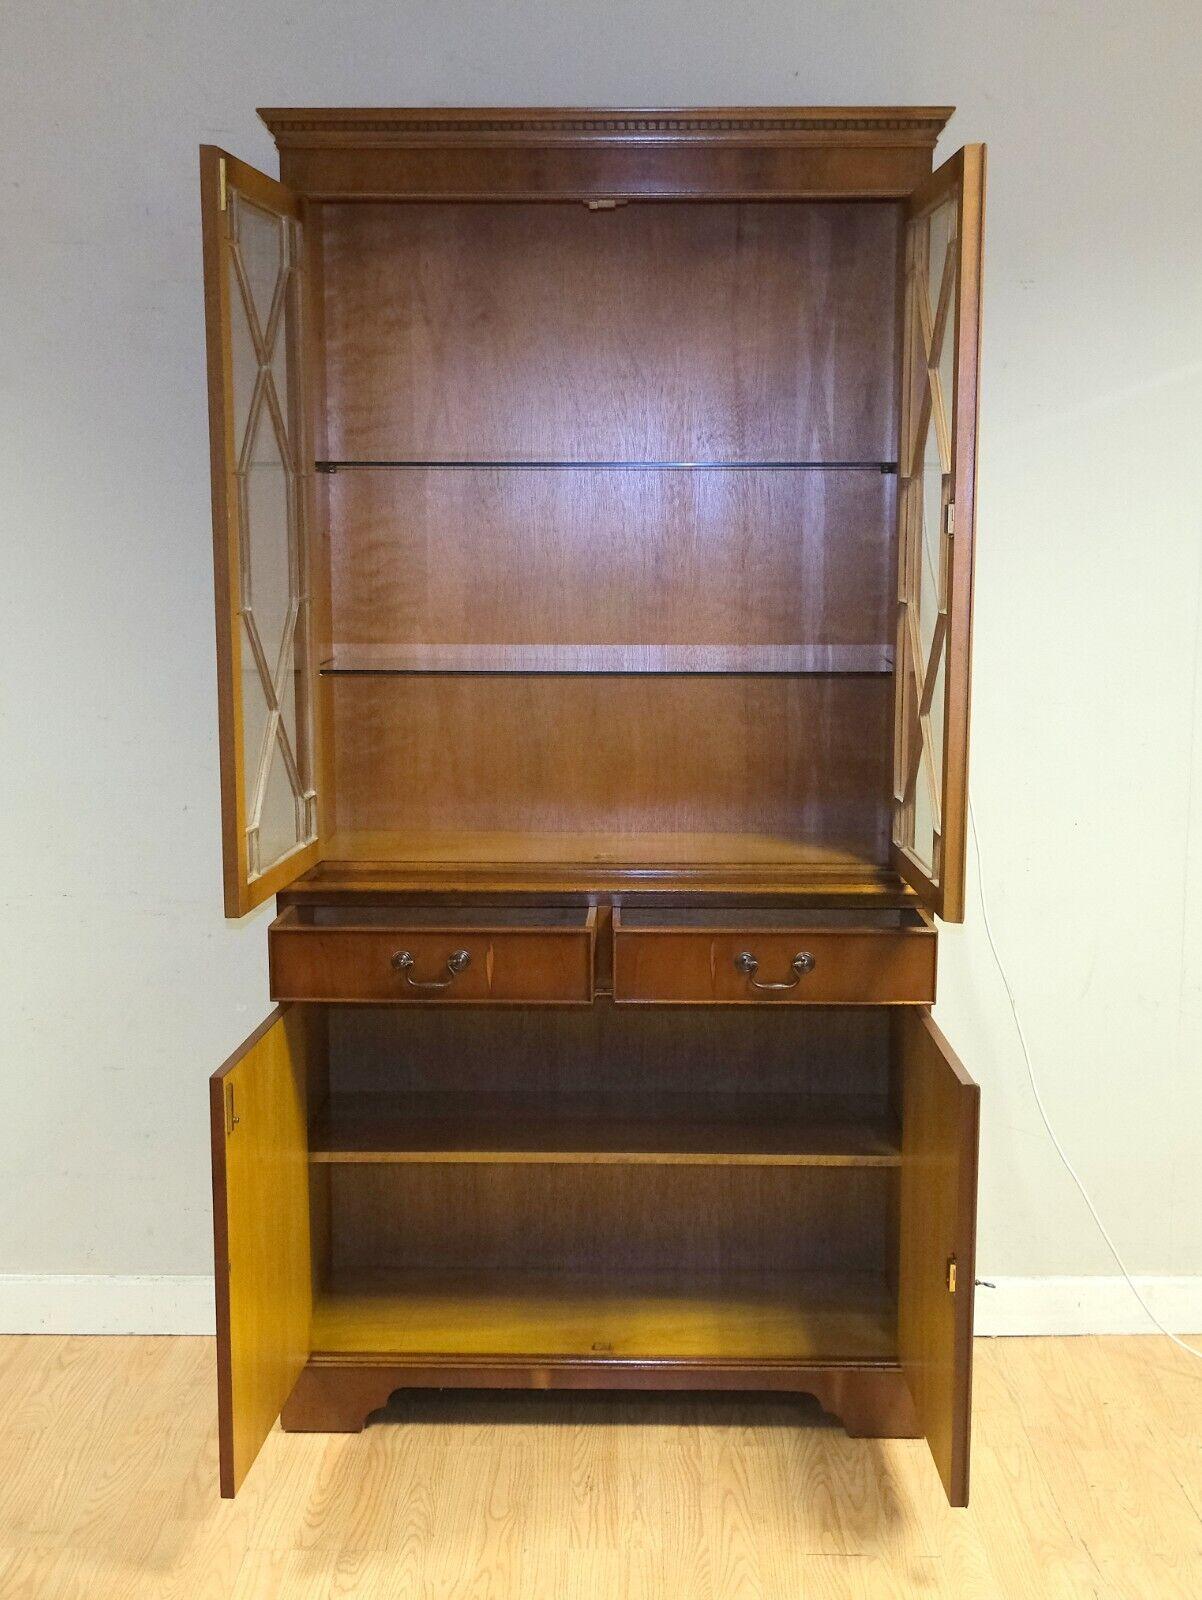 Hand-Crafted Beautiful Yew Wood Display Cabinet with Lights & Adjustable Glass Shelves